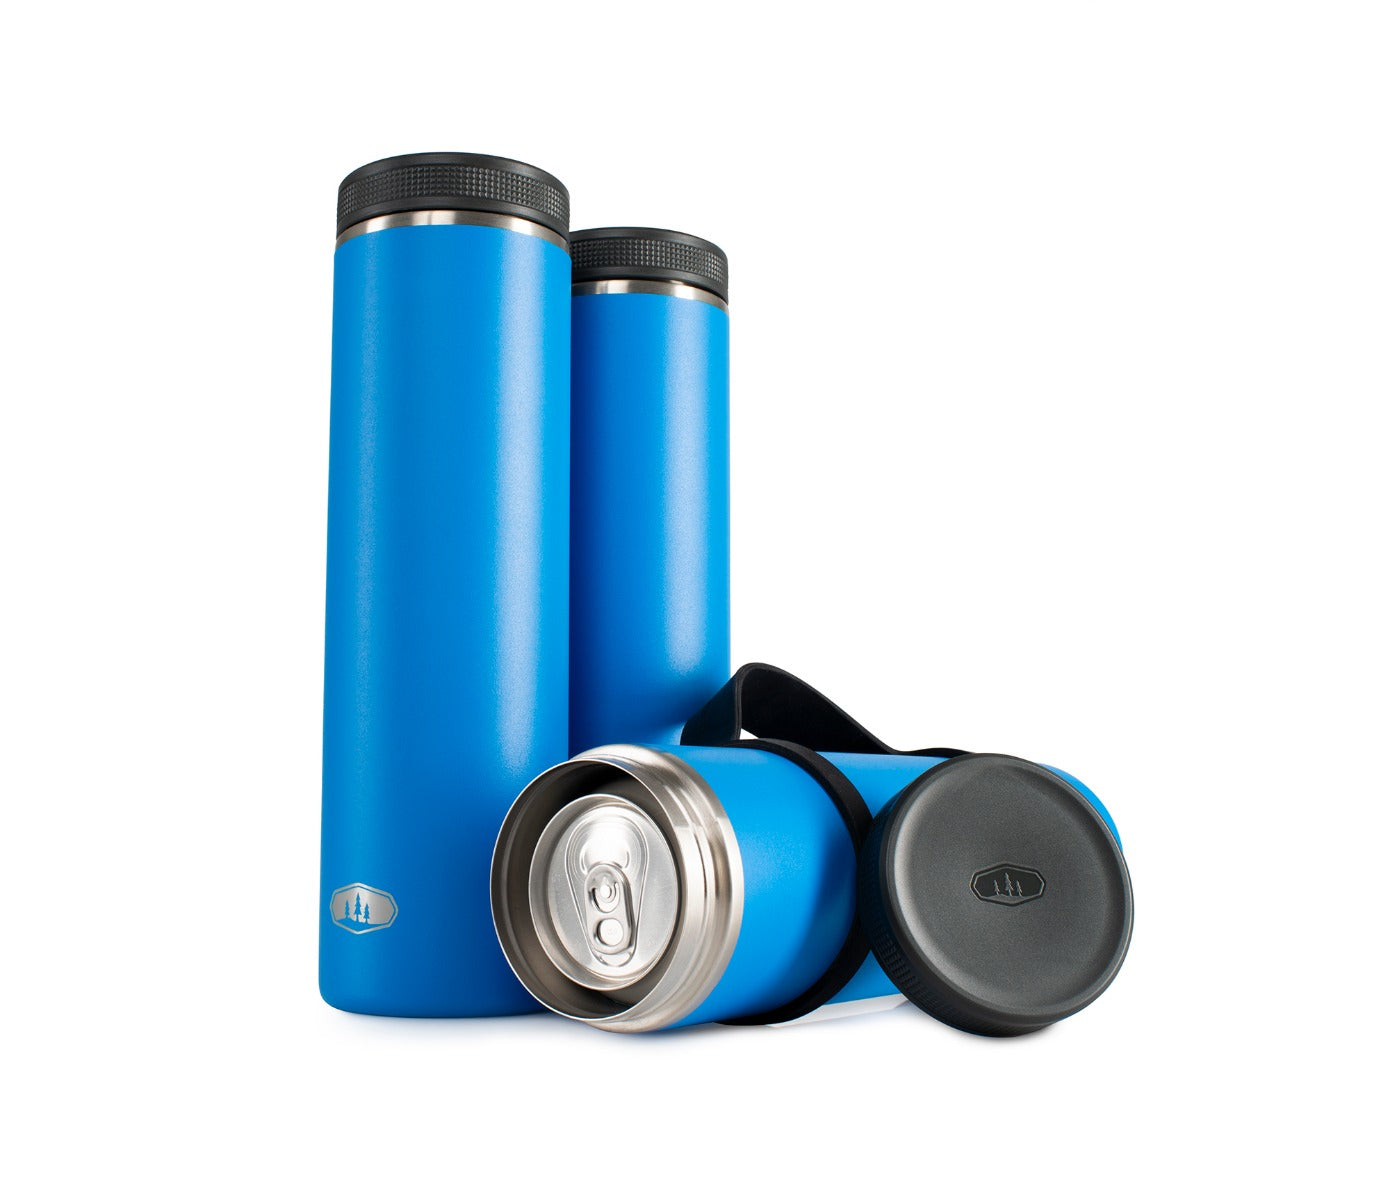 GSI's iceless cooler tube totes and serves two cans of beer in the